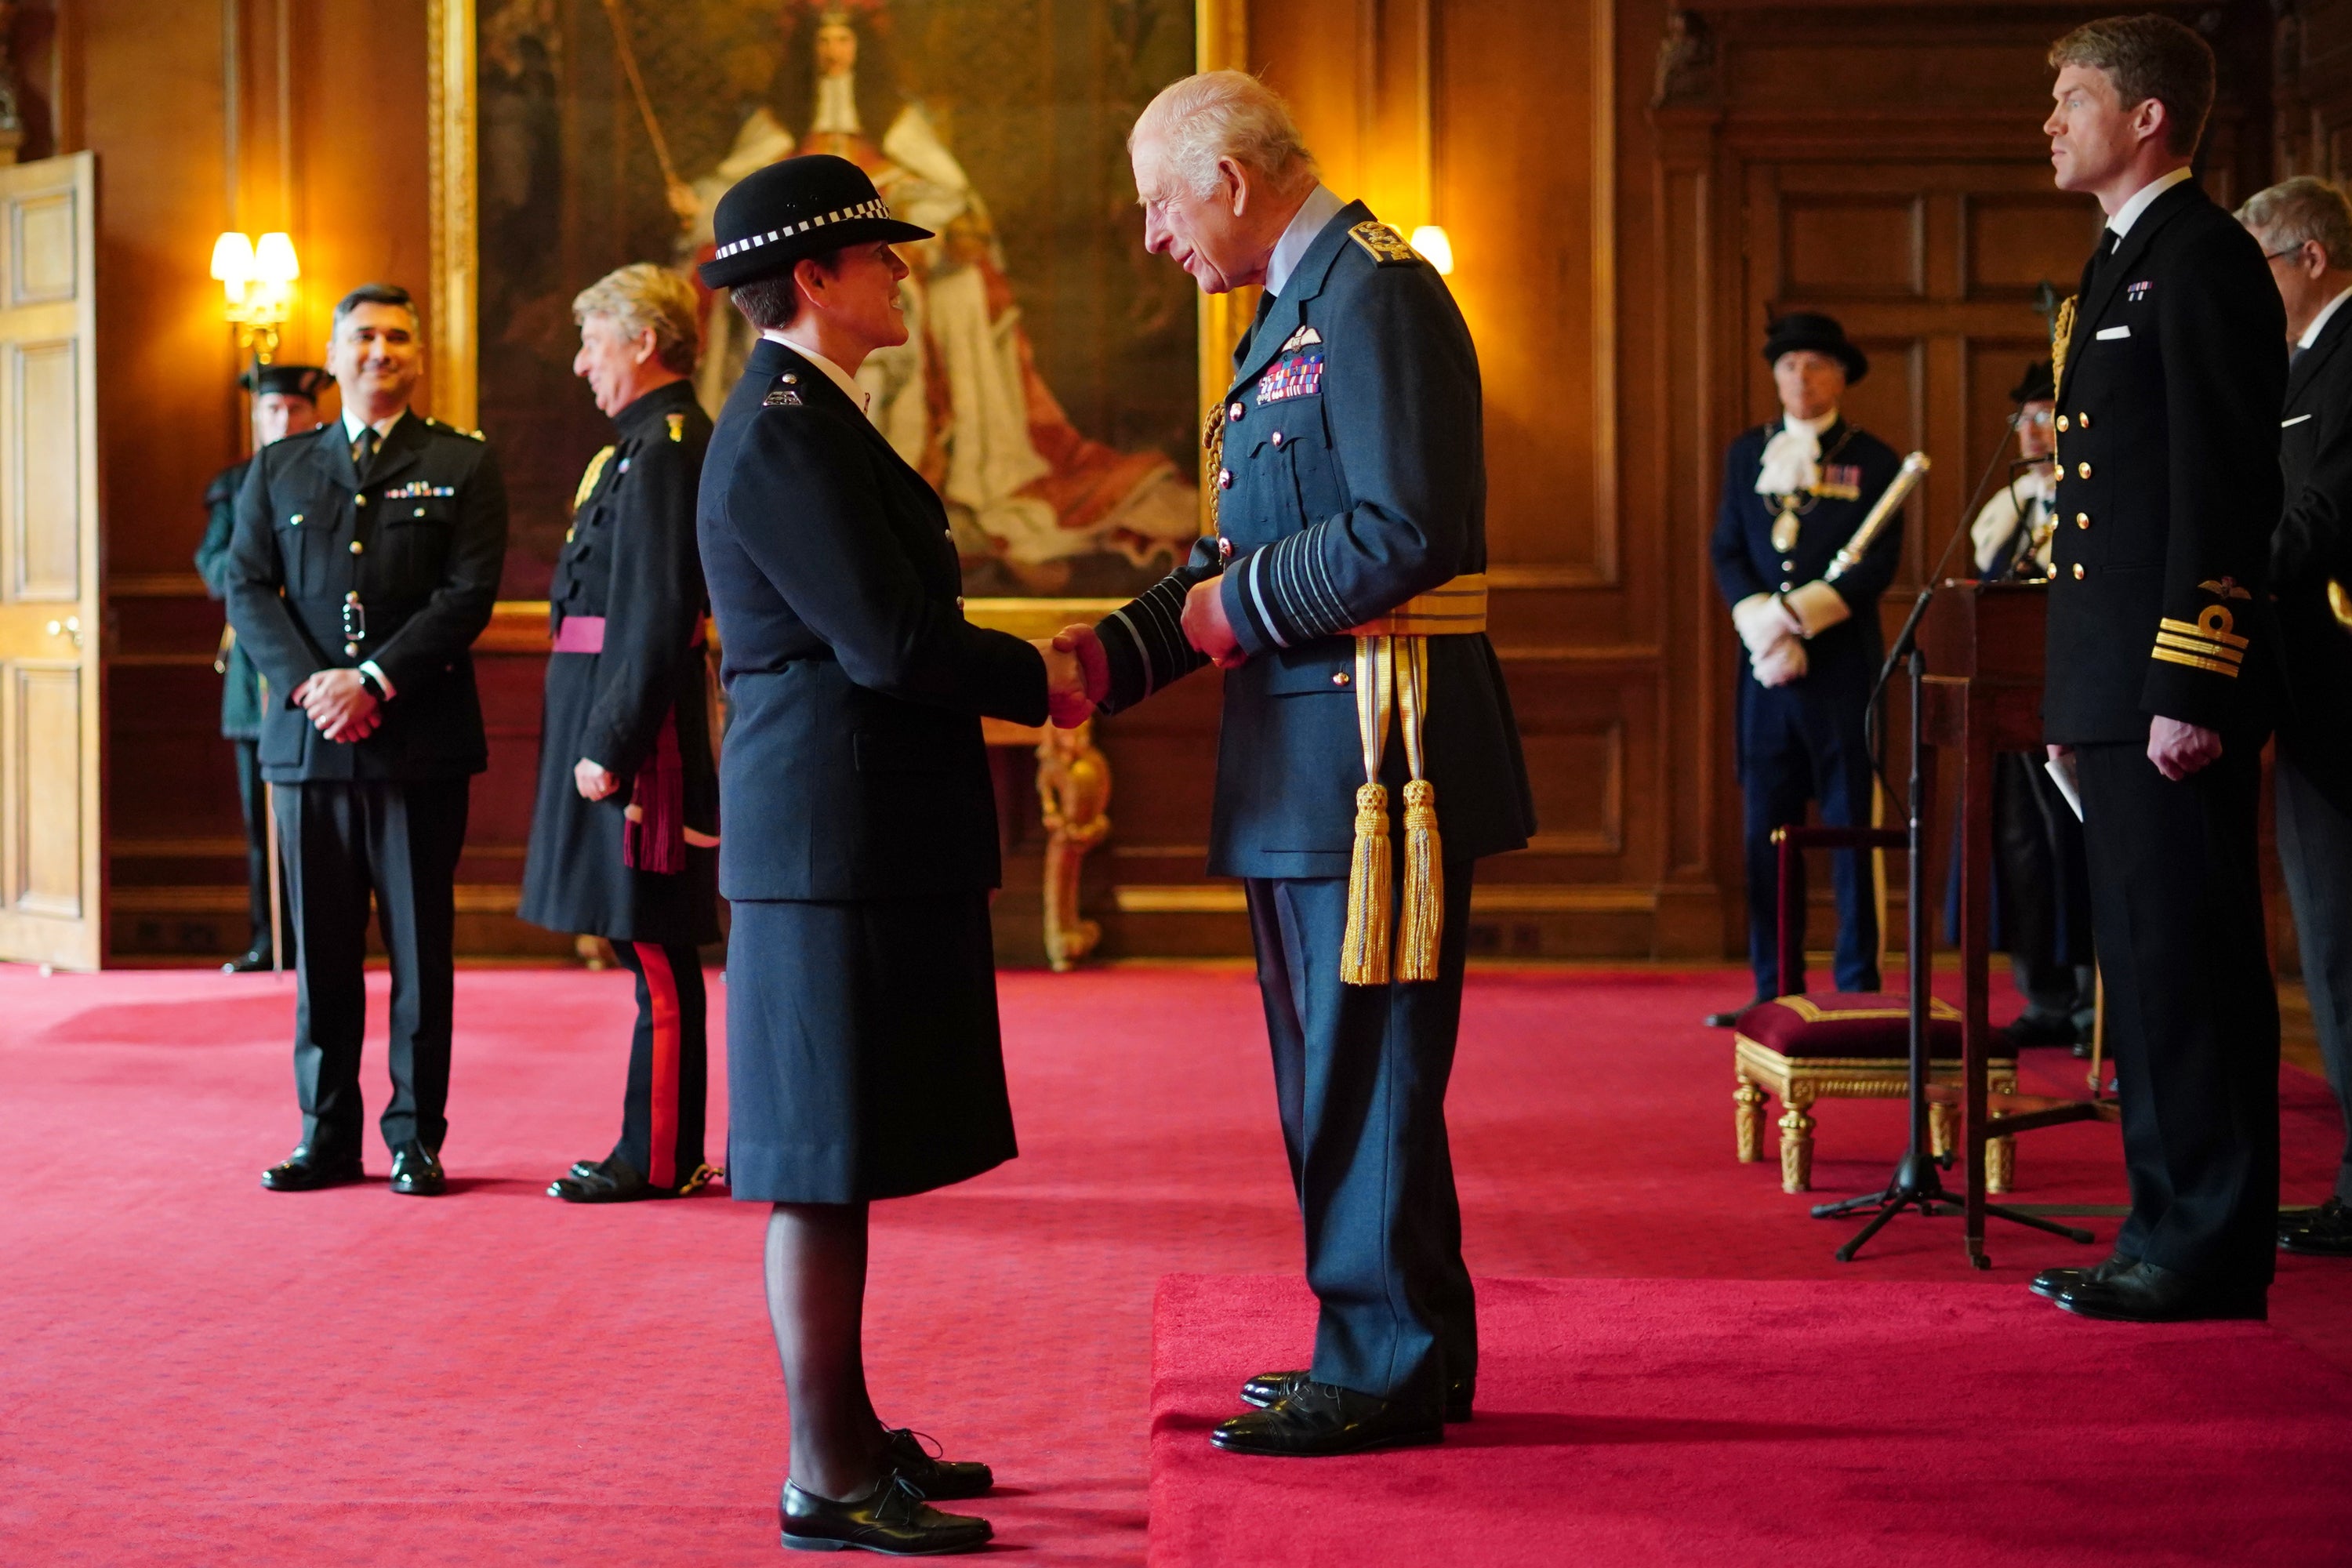 Pc Stephanie Rose shook hands with the King as she received her medal (Jane Barlow/PA)